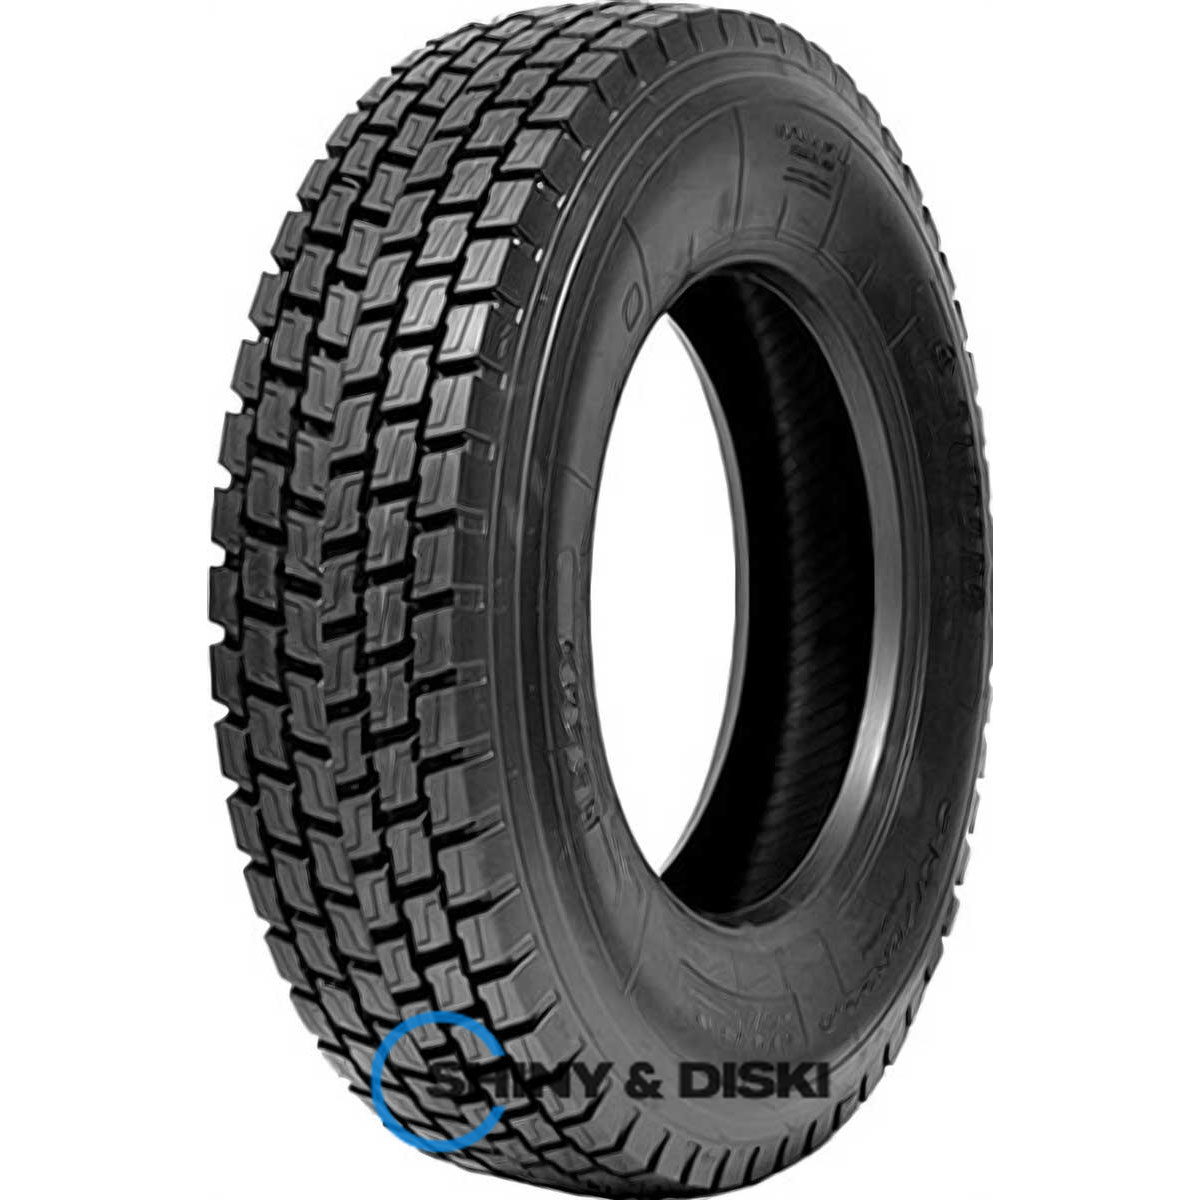 taitong hs202 (ведущая ось) 315/70 r22.5 157/153l